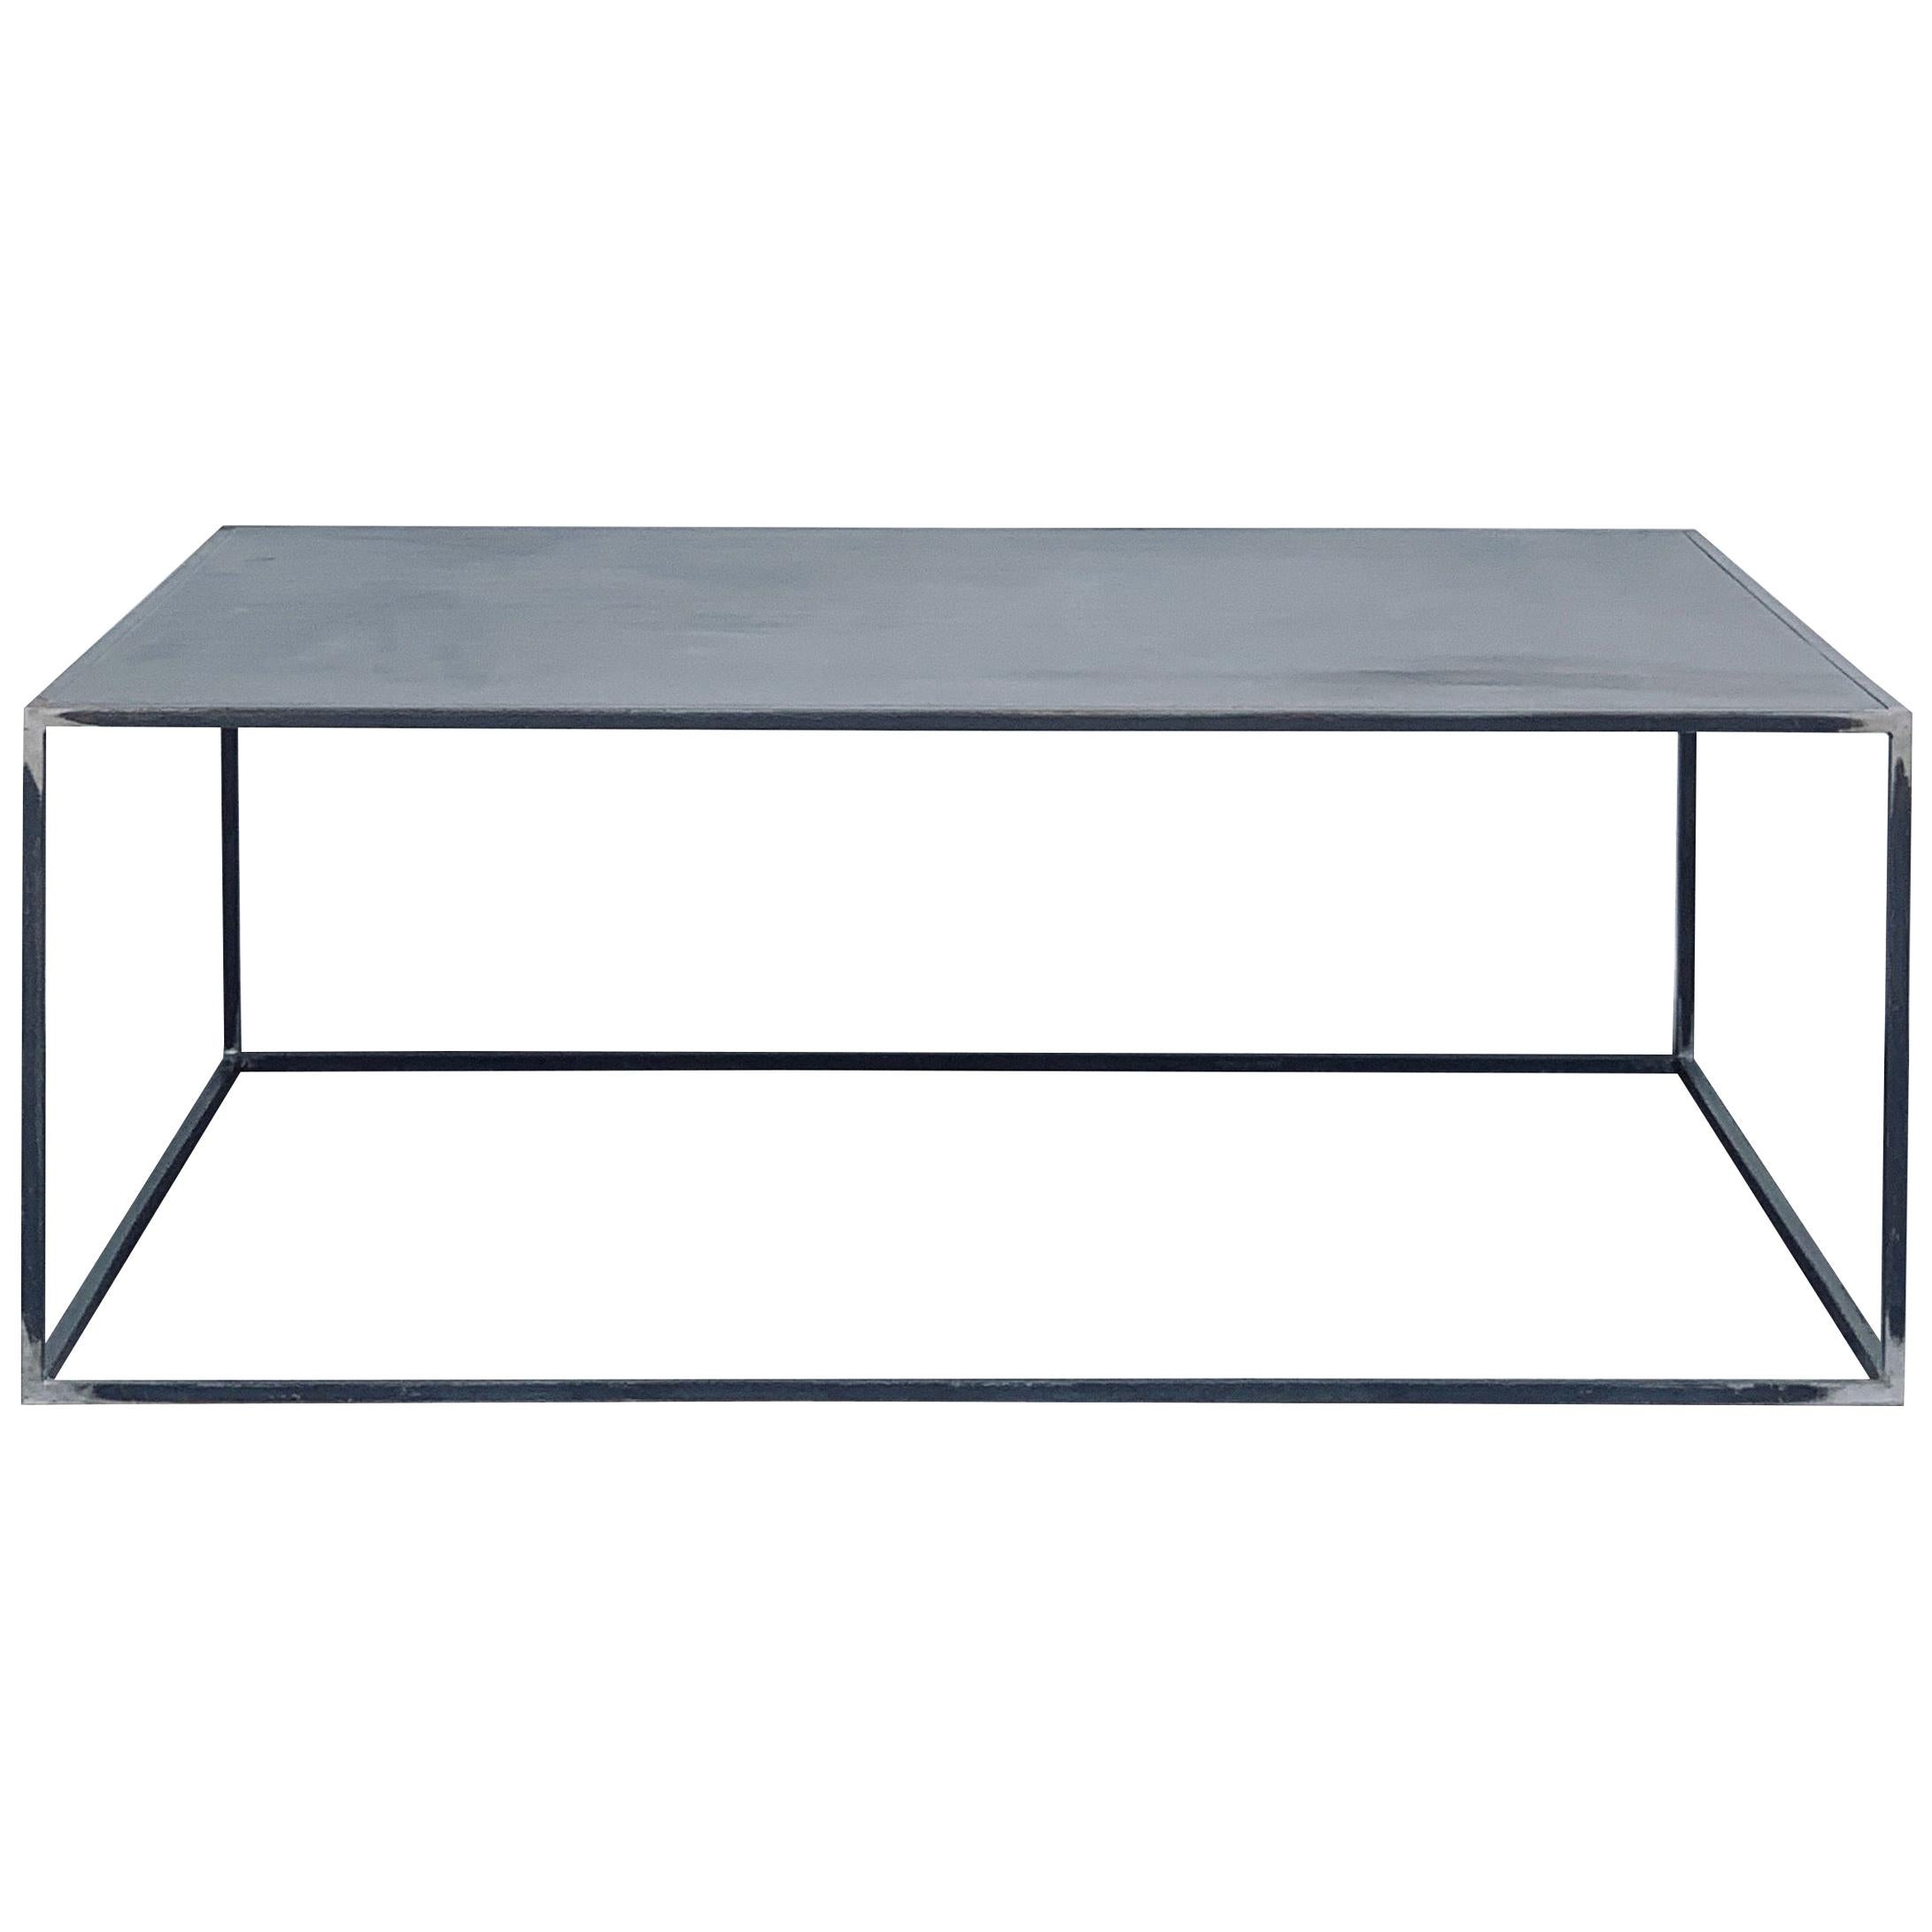 Huge Minimalist 'Filiforme' Patinated Steel Coffee Table by Design Frères